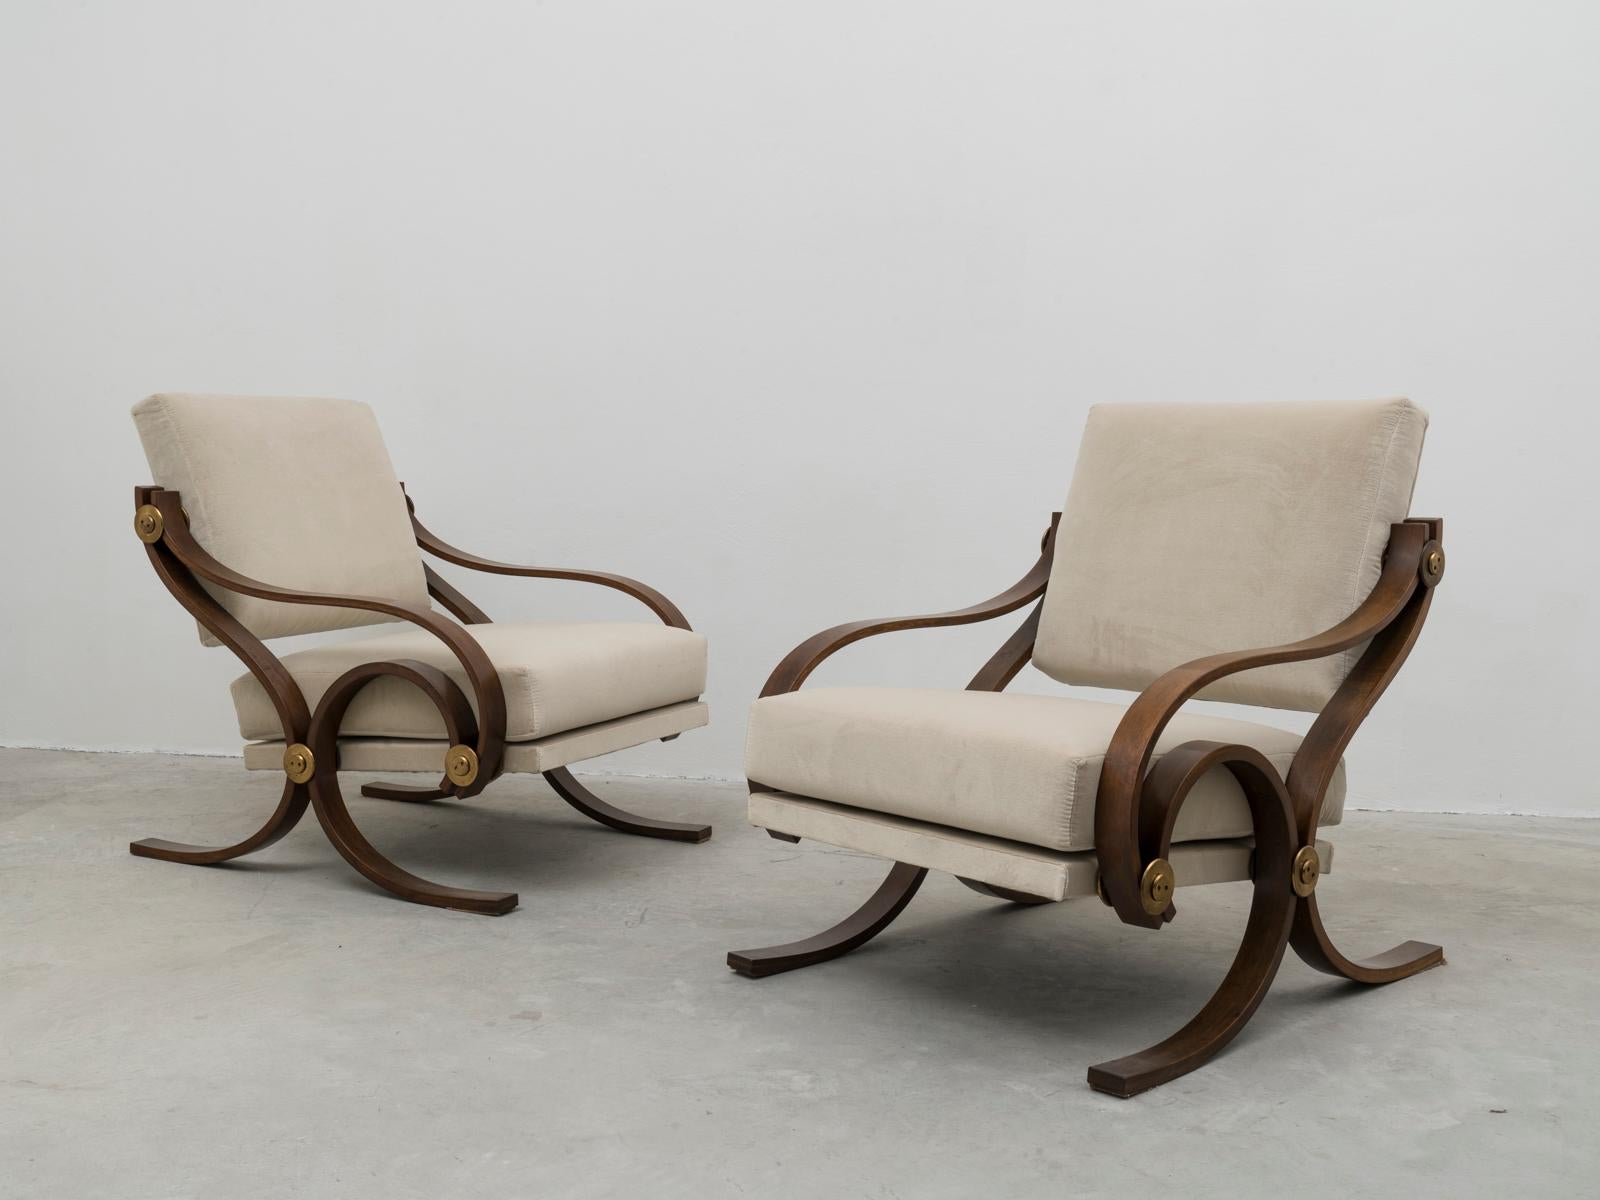 This very rare pair of midcentury armchairs was designed by Antonio Scoccimarro, son of the important architect Cesare, for Adrasteia in the late 1950s. The model is called 